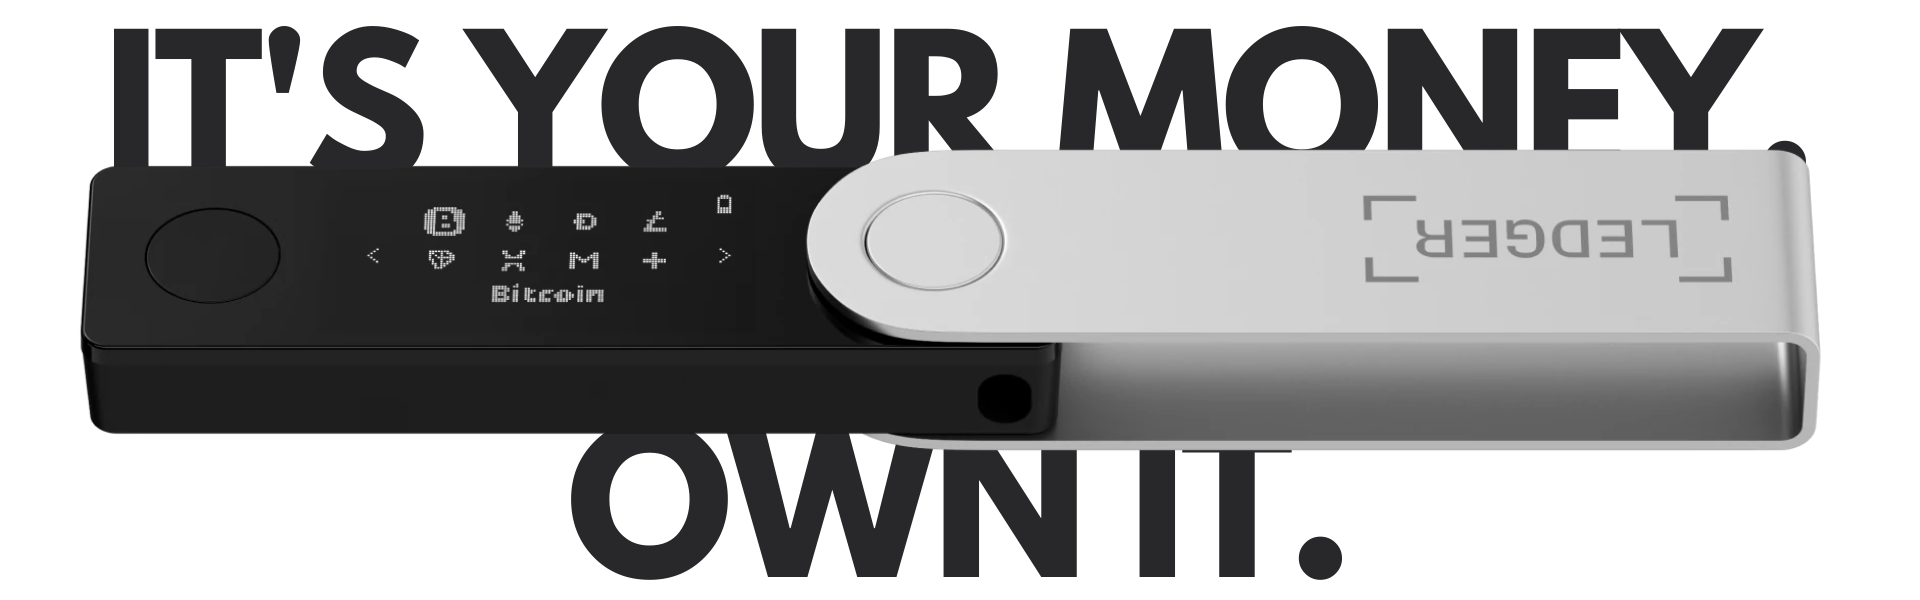 Ledger Nano X - Secure your crypto. Make sure your crypto assets are safe anywhere you go with the most advanced hardware wallet yet. The Ledger Nano X is a bluetooth enabled secure device that stores your private keys and offers an easy-to-use experience for crypto owners